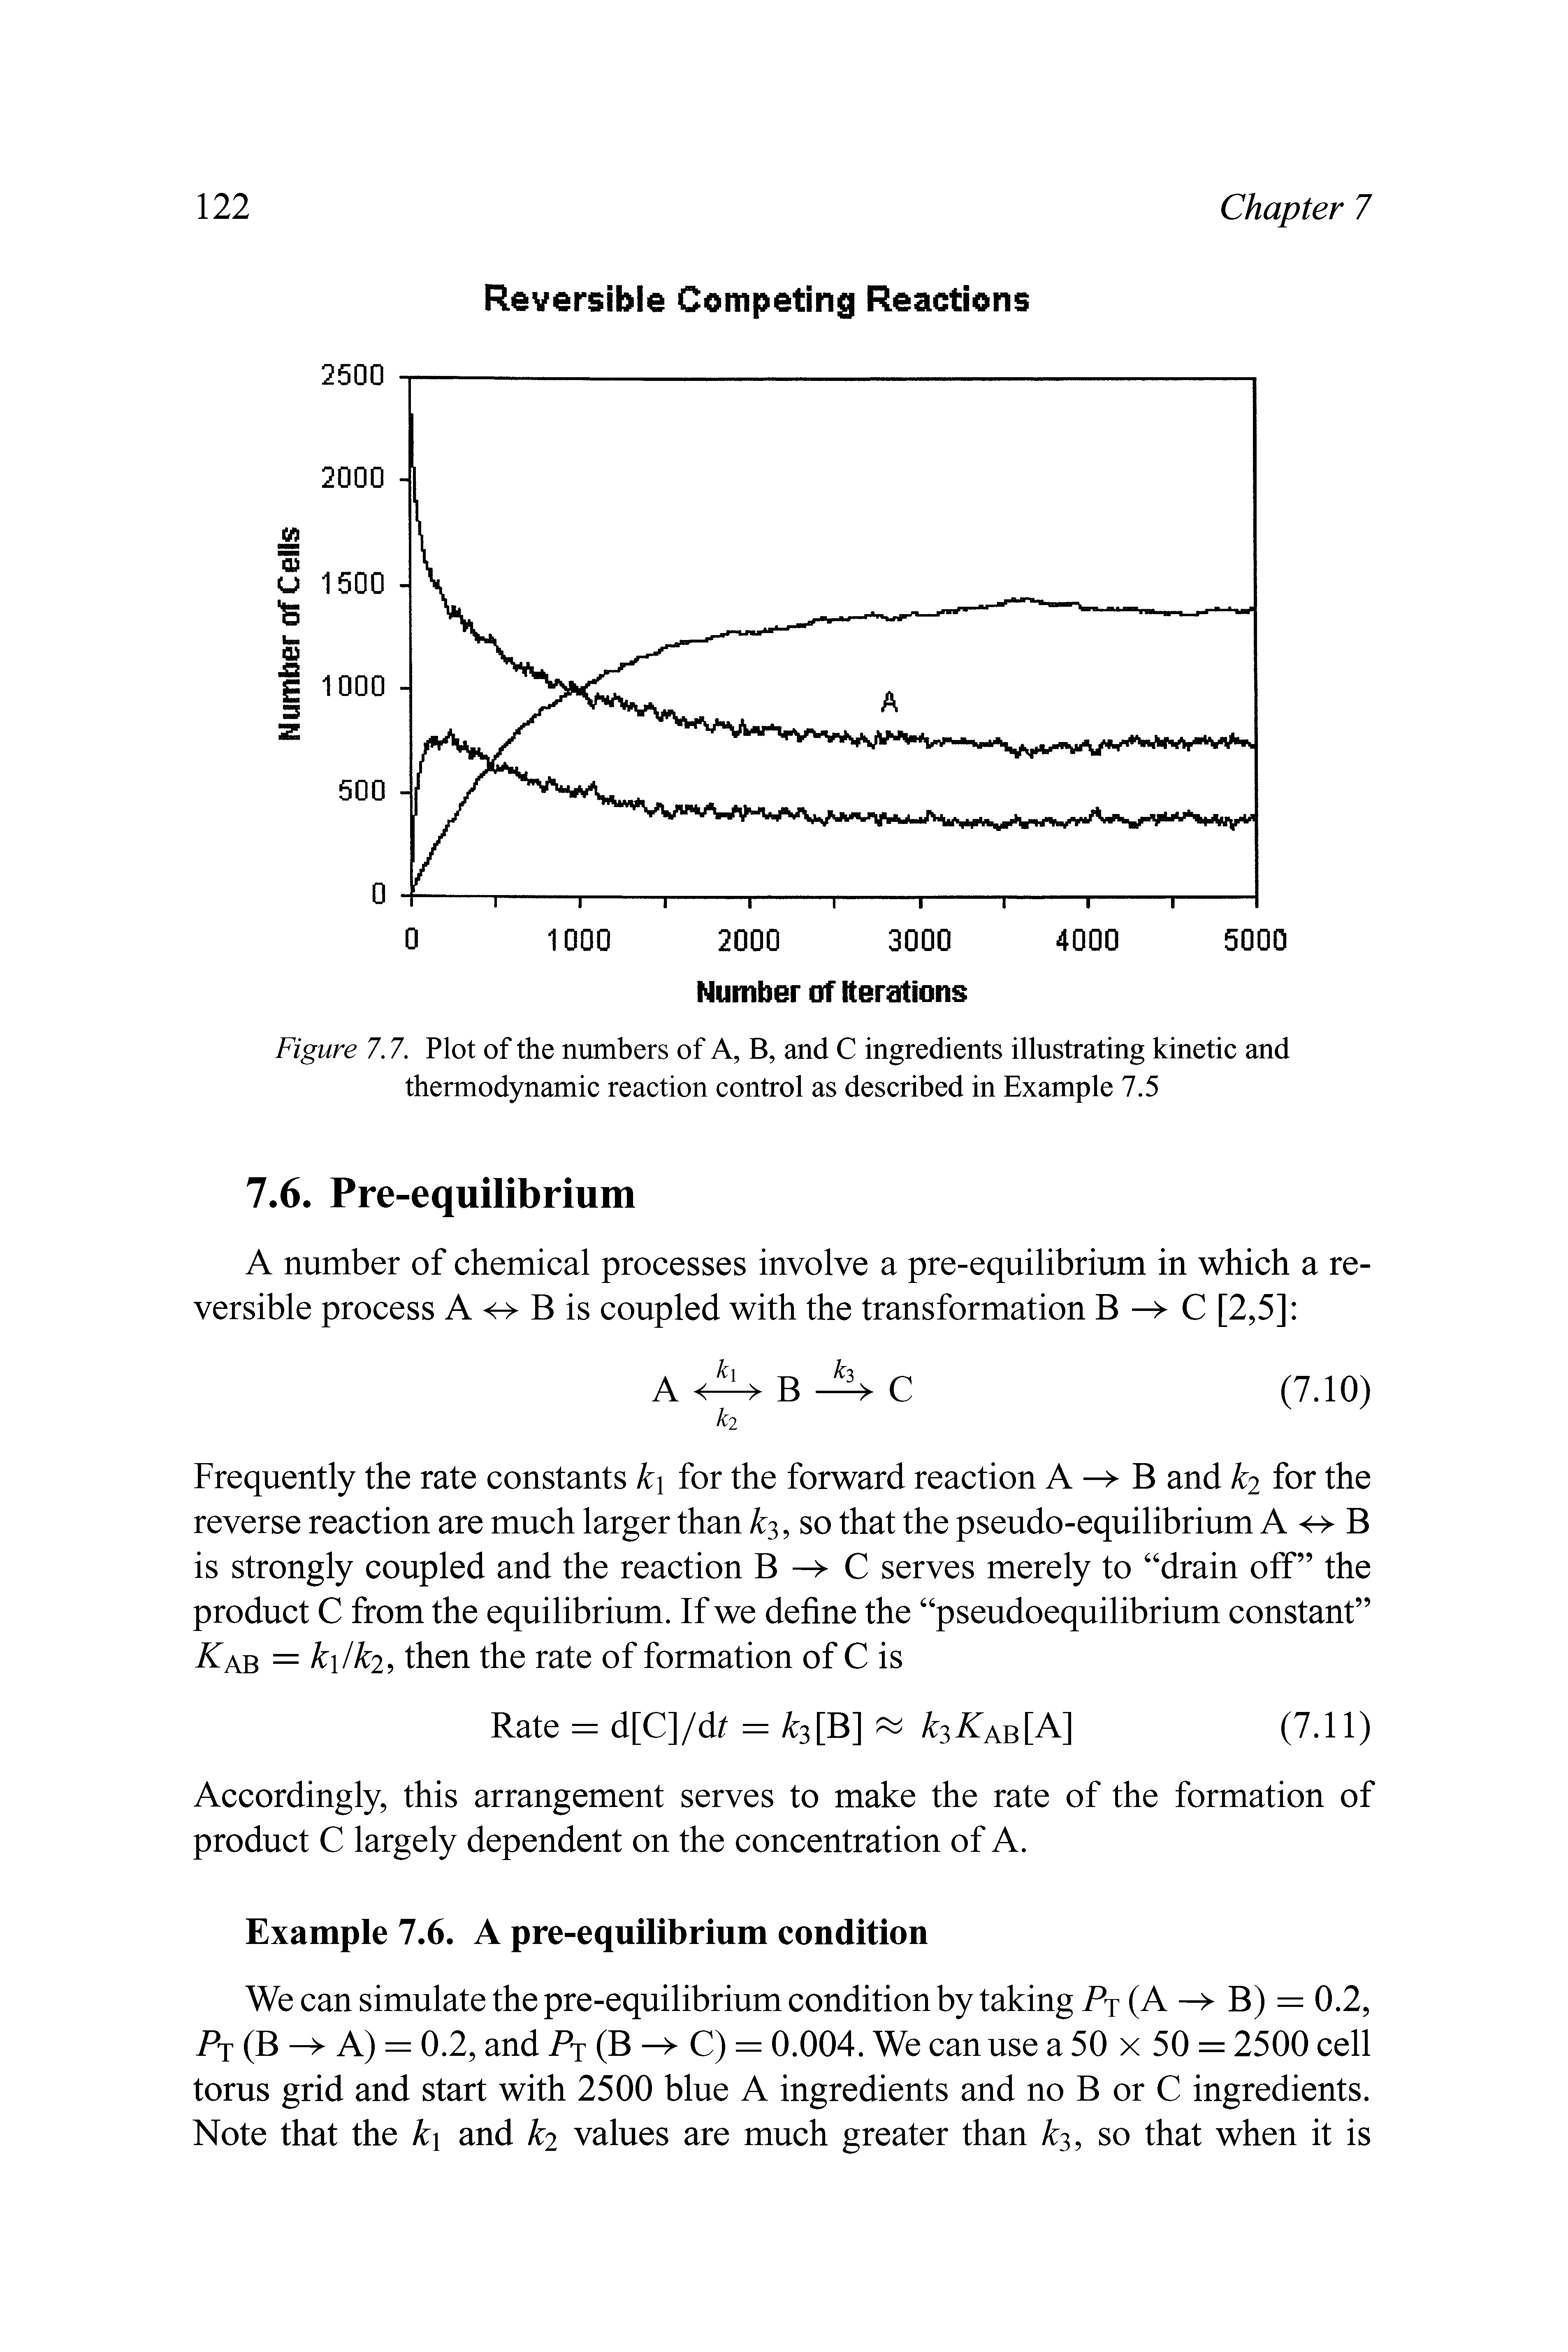 Figure 7.7. Plot of the numbers of A, B, and C ingredients illustrating kinetic and thermodynamic reaction control as described in Example 7.5...